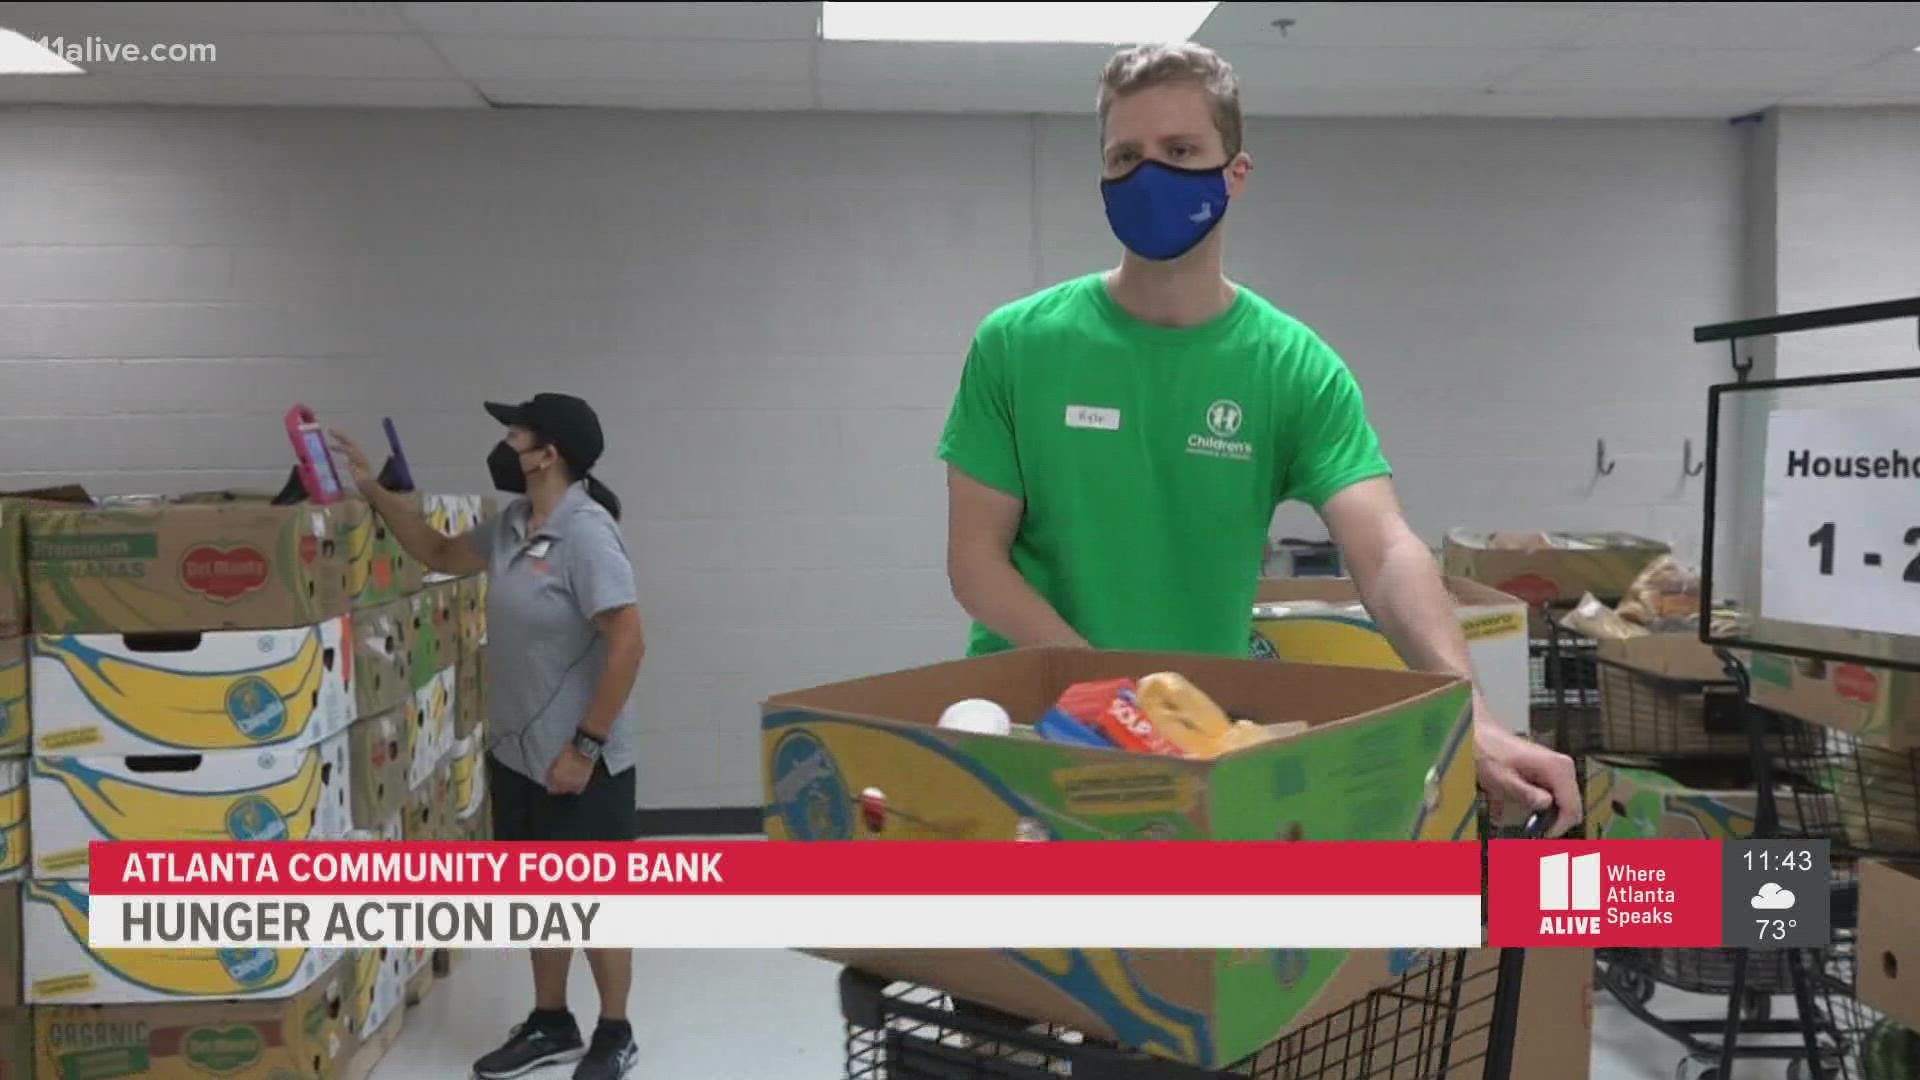 Atlanta businesses are joining forces to raise awareness about food insecurity day.